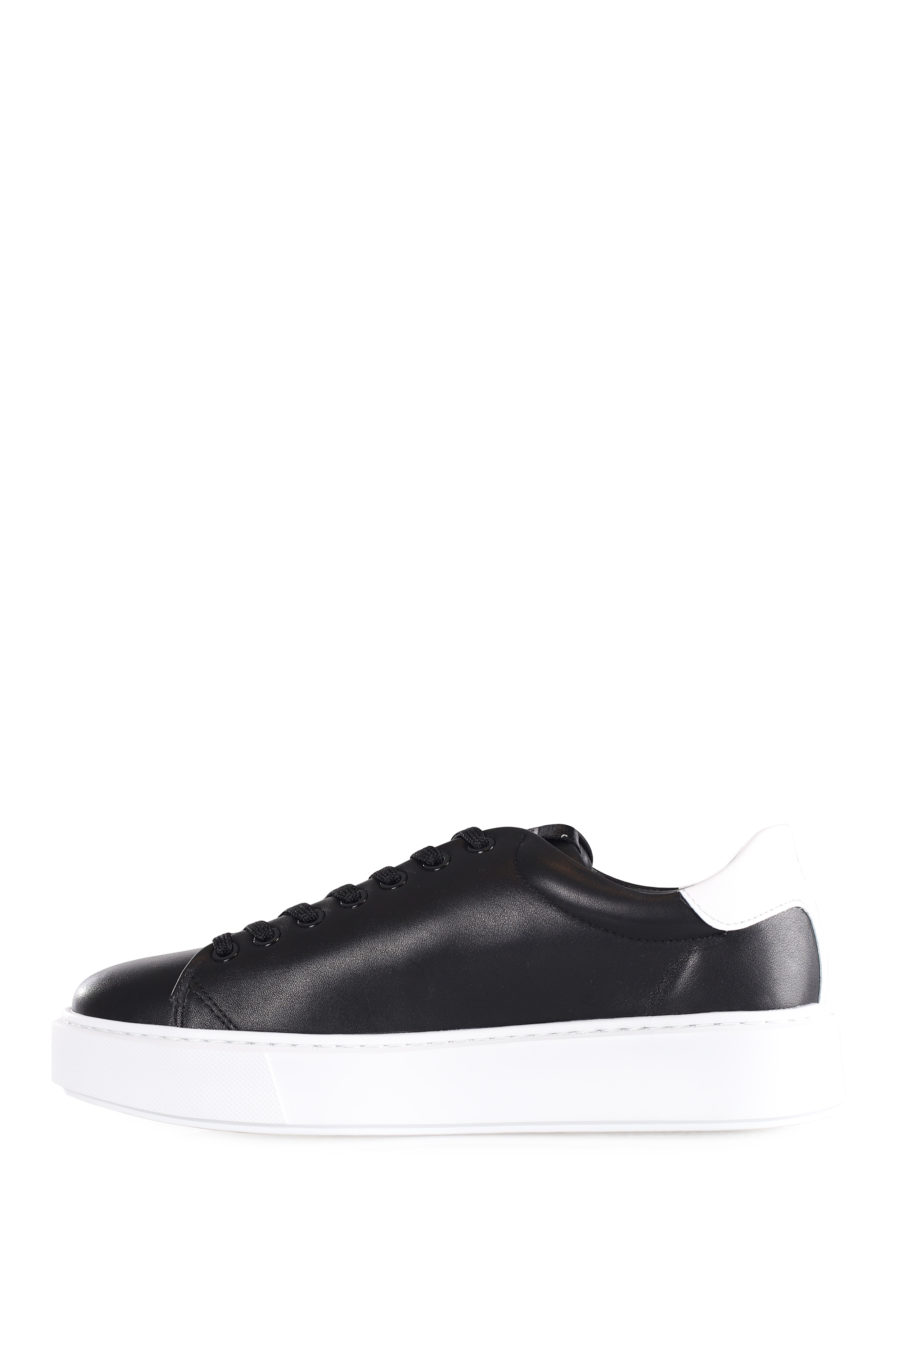 Black trainers with maxi rubber logo - IMG 9578